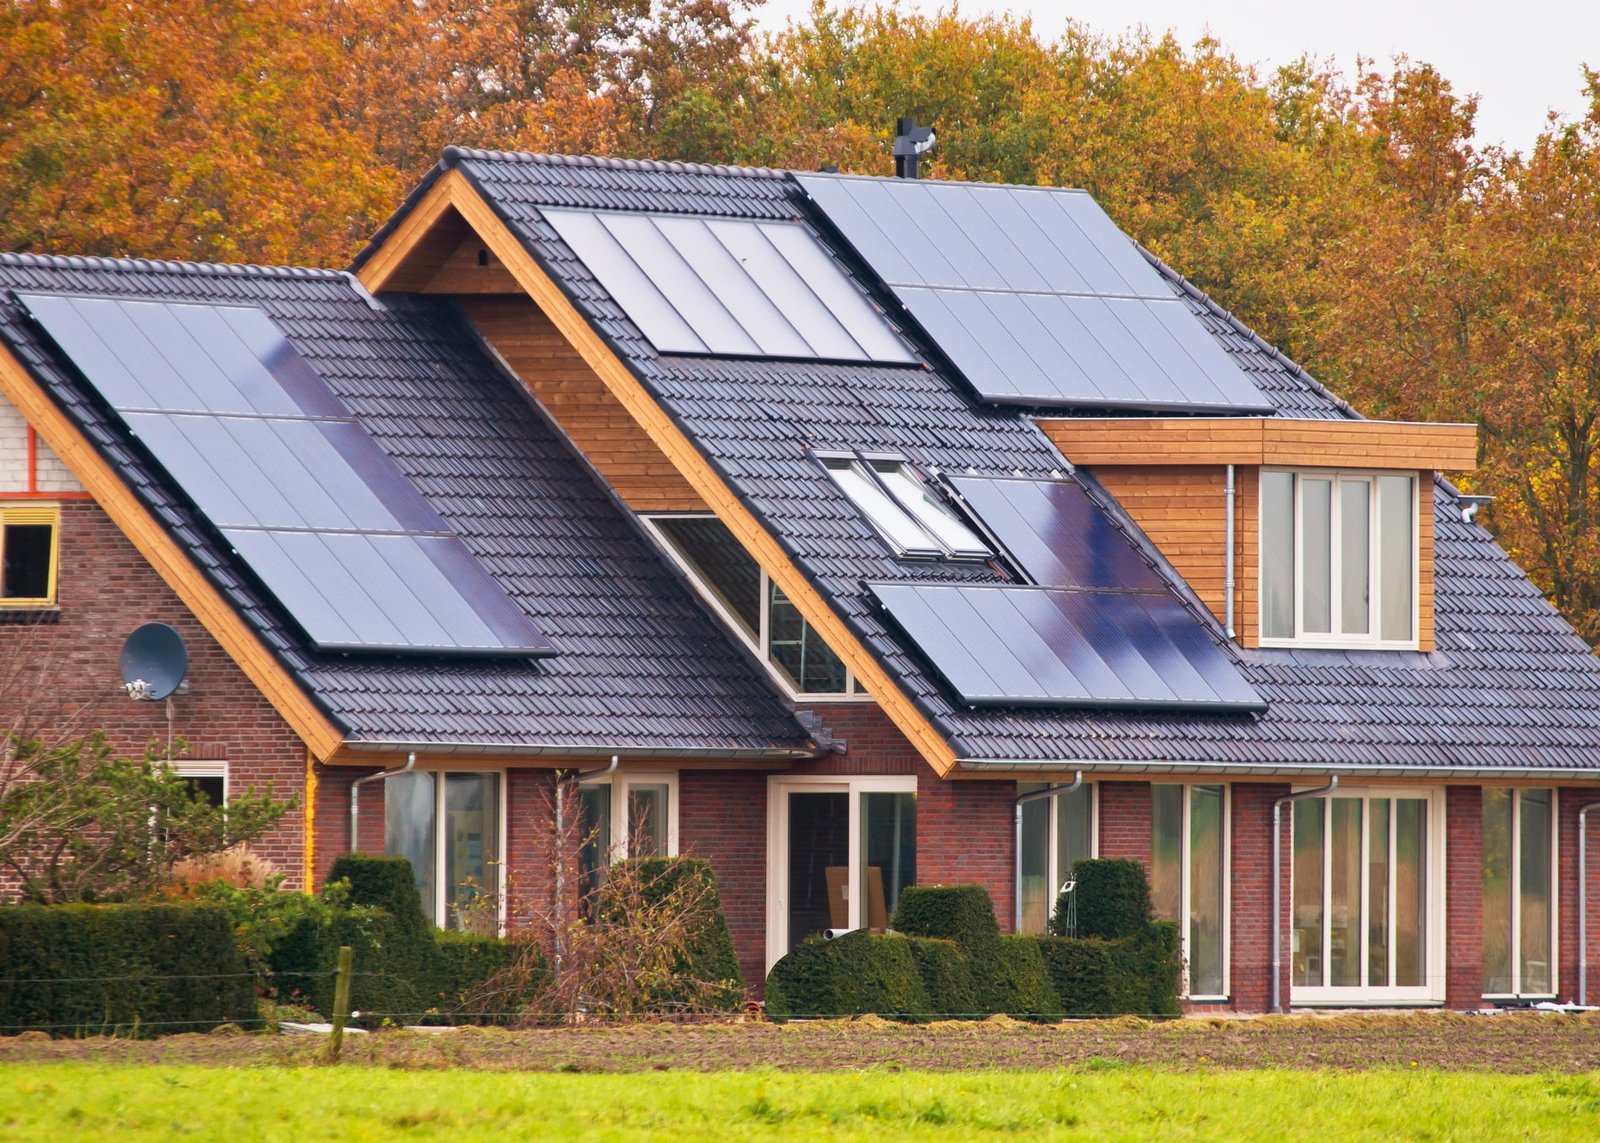 Discovering the Top Best Solar Panels for Home 2023